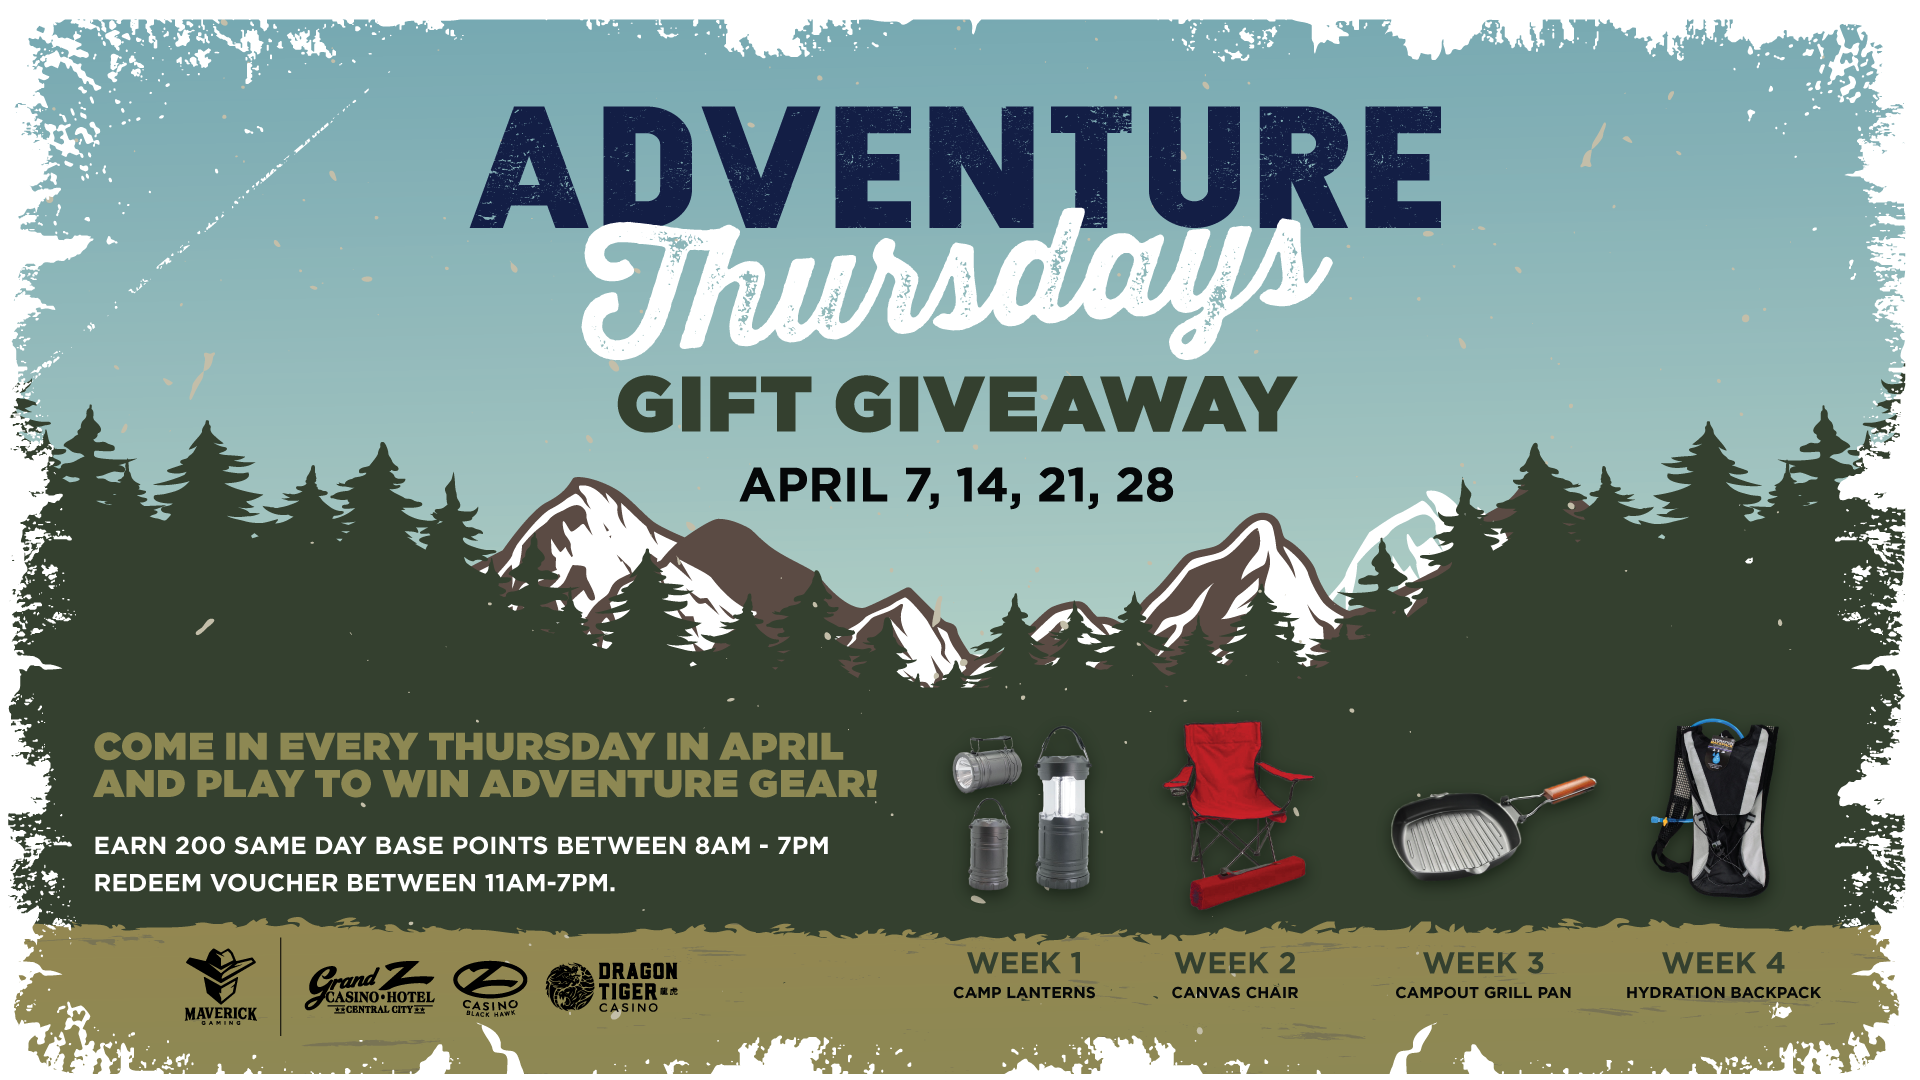 Adventure Thursdays Gift Giveaway April 7, 14, 21, 28 com in every Thursday in April and play to win adventure gear. Earn 200 same day base points beween 8am - 7pm Redeem voucher between 11am-7pm.